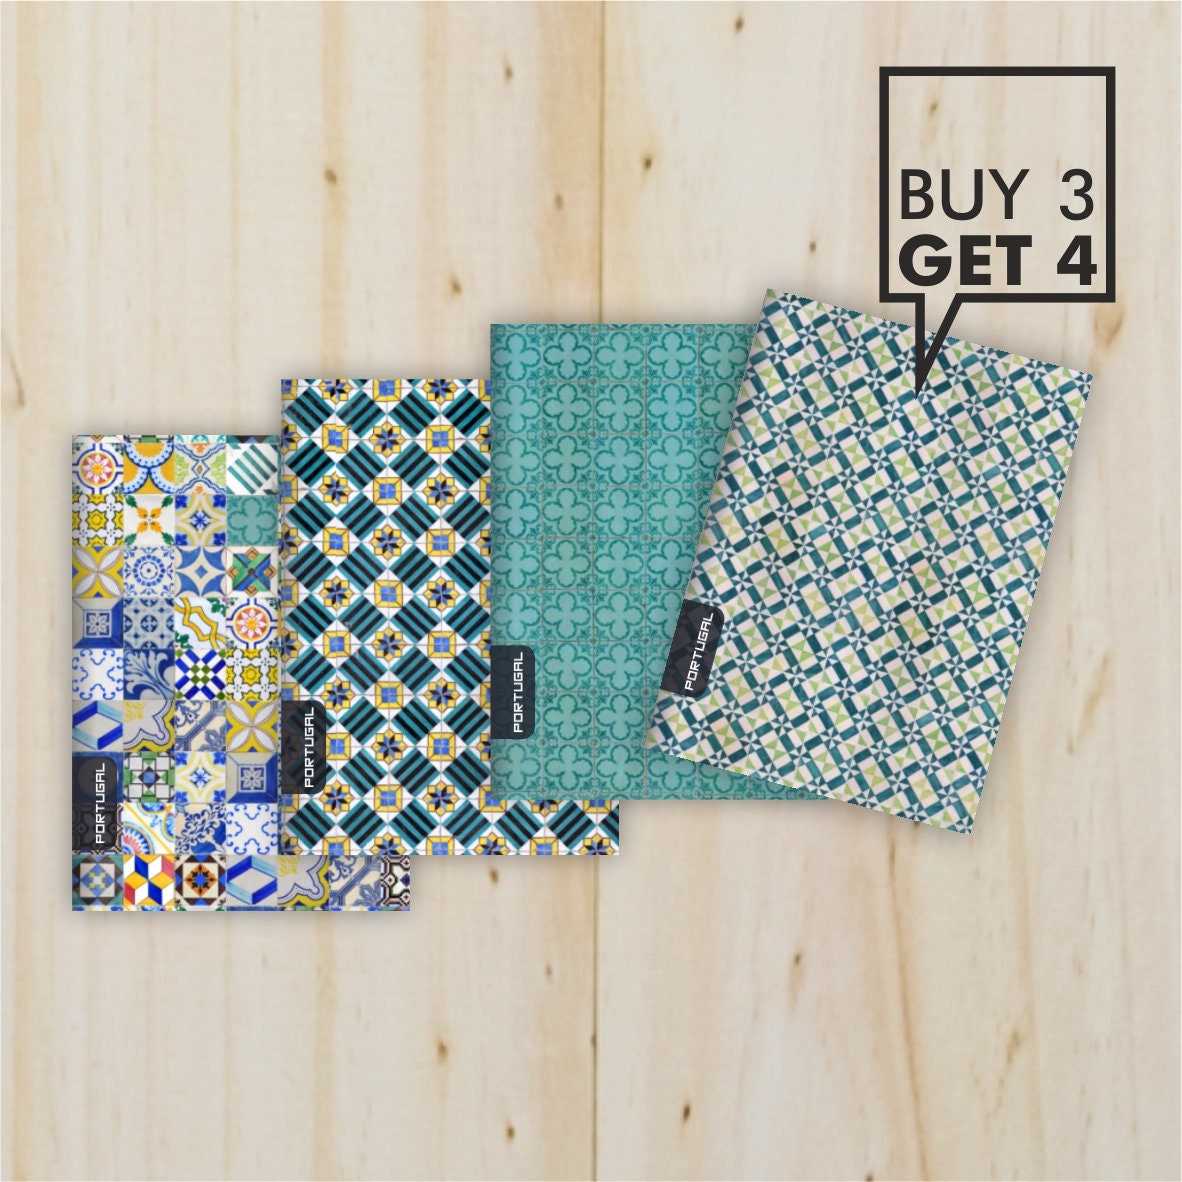 Buy 3 Get 4 Notebooks Inspired in The Portuguese Tiles, Eco Friendly Recycled Paper - Option C